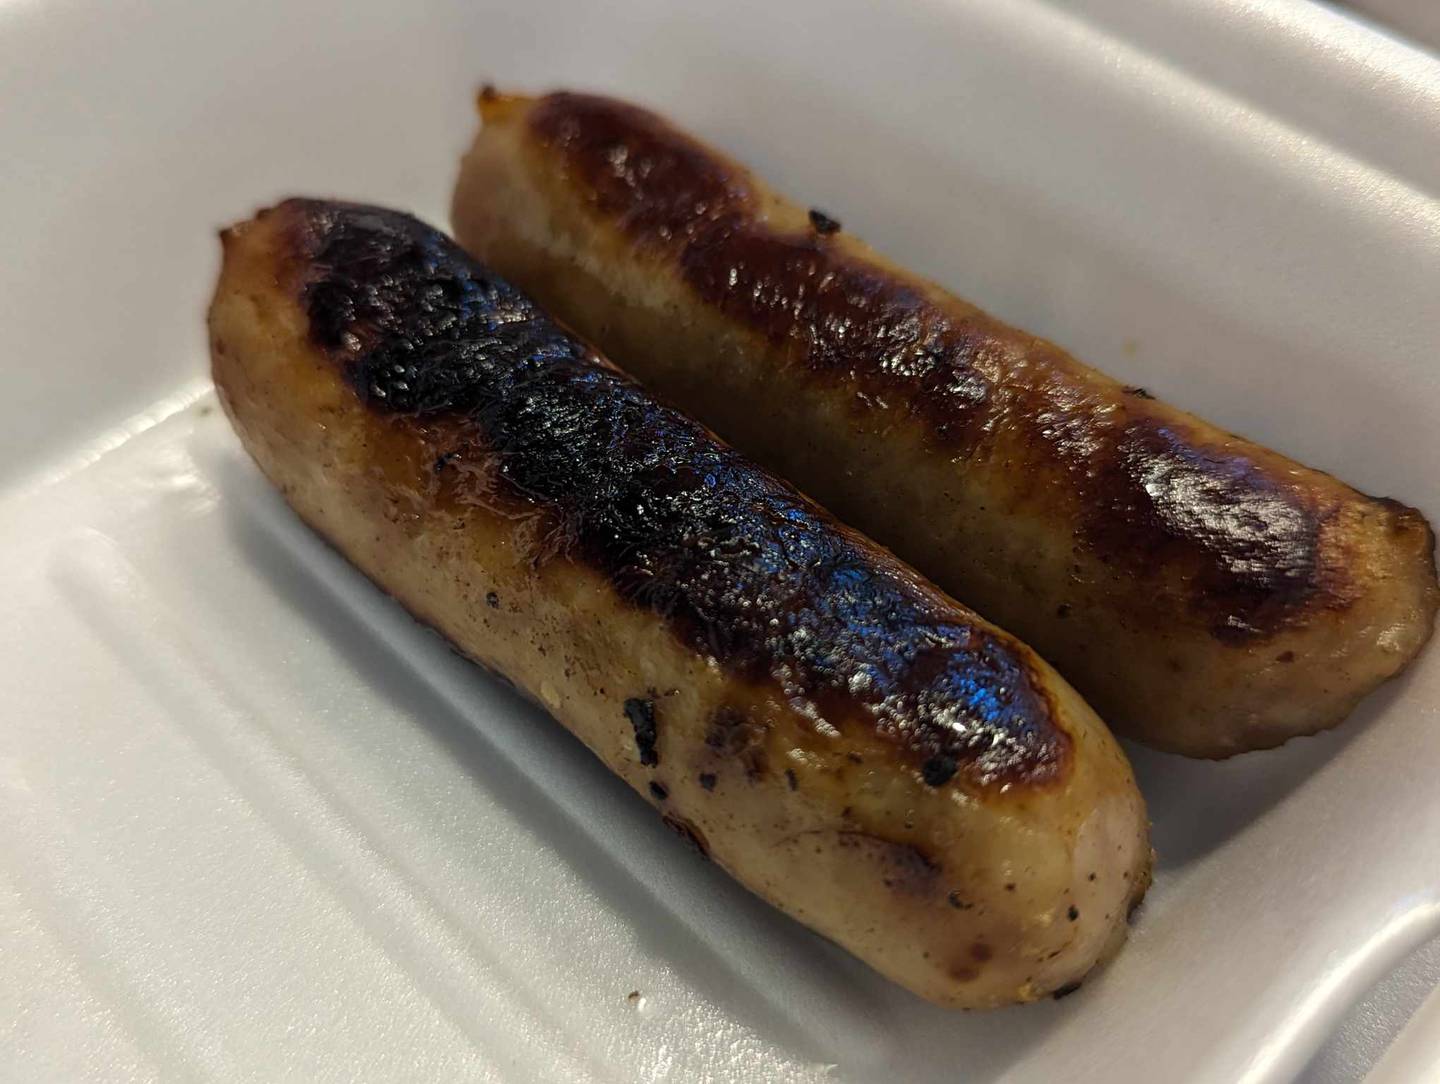 Pictured is a side order of turkey sausage as served at the Southern Cafe in Crest Hill.